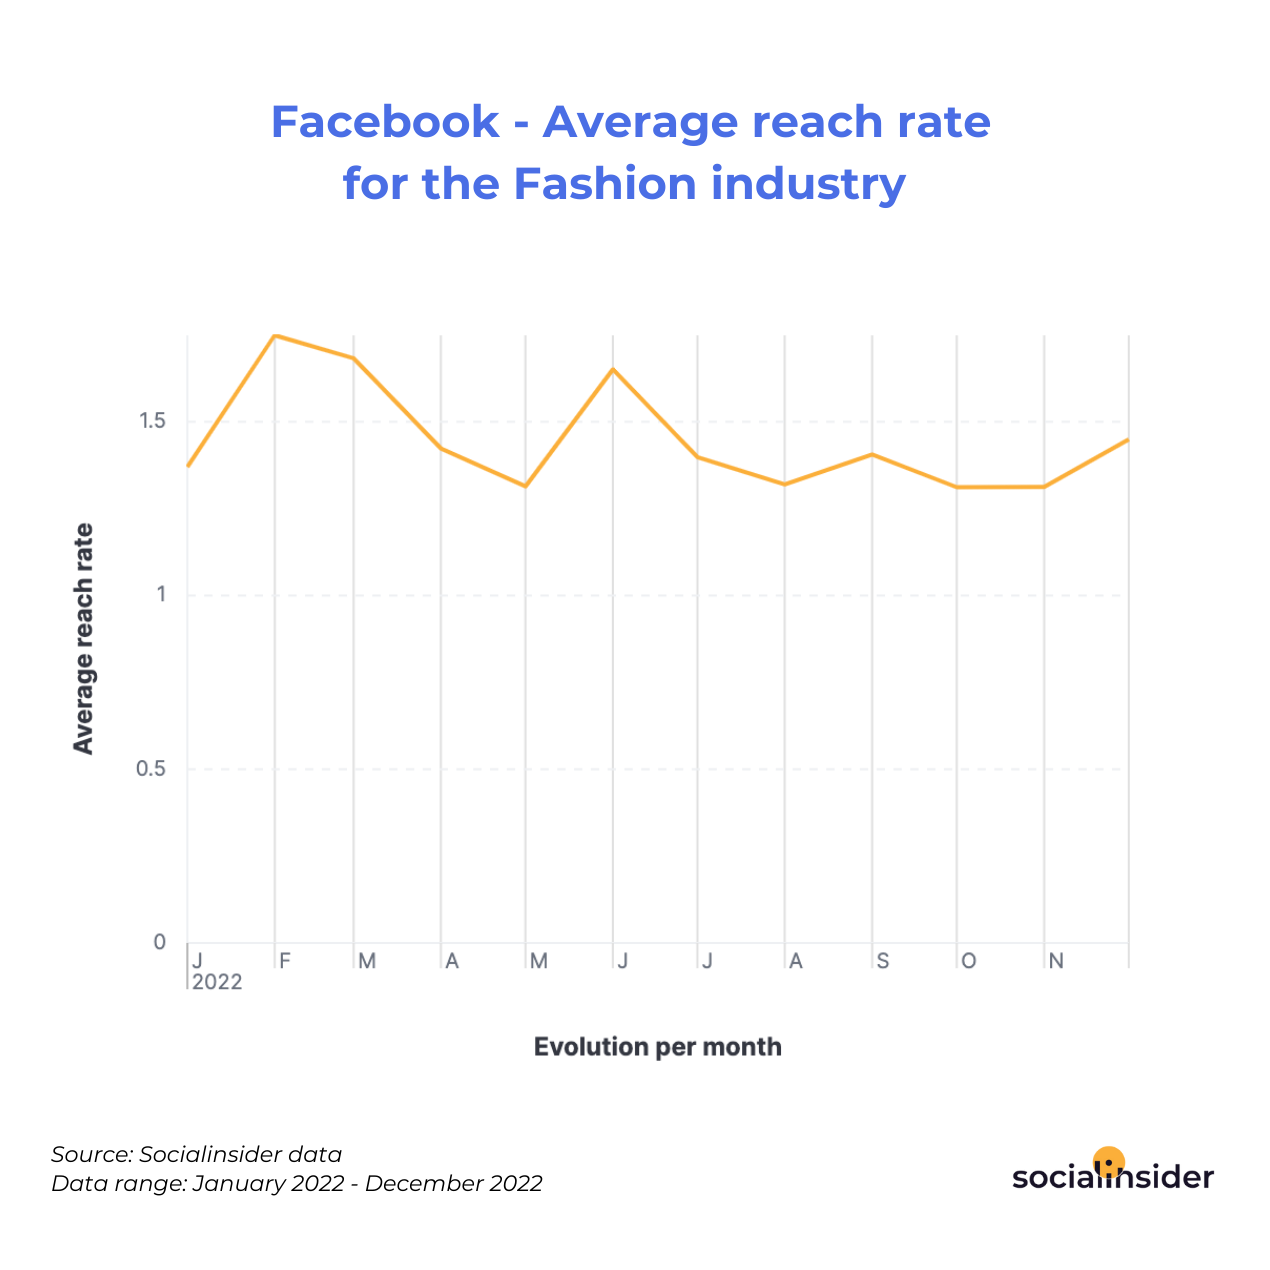 Facebook - Average reach rate for the Fashion industry 